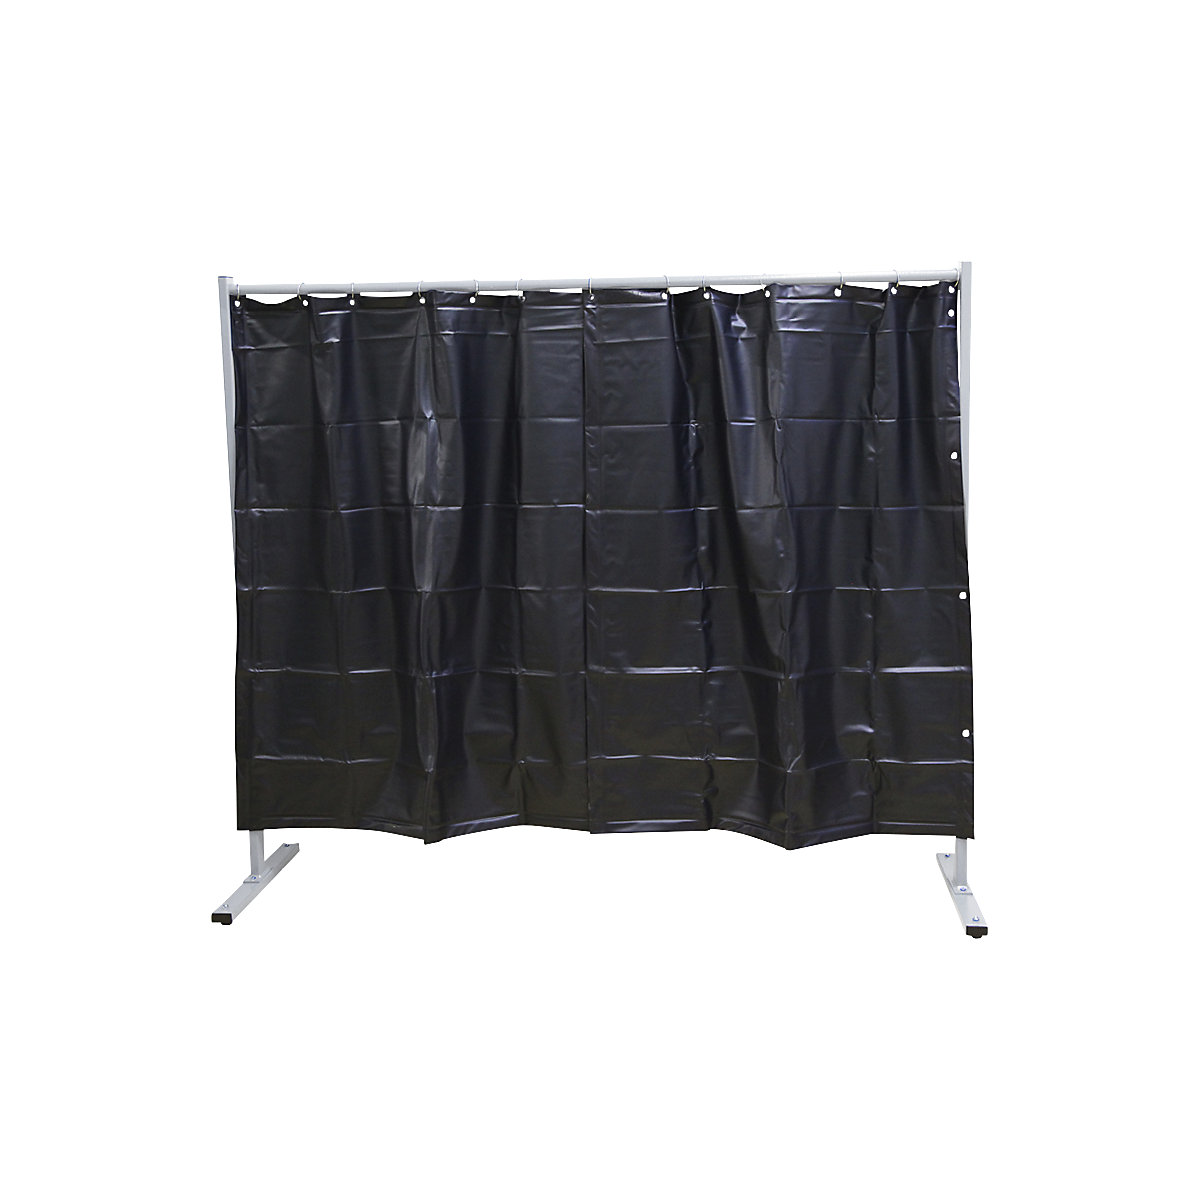 Mobile welding protection screen, single unit design, HxW 1900 x 2100 mm, with welding protection film, dark green